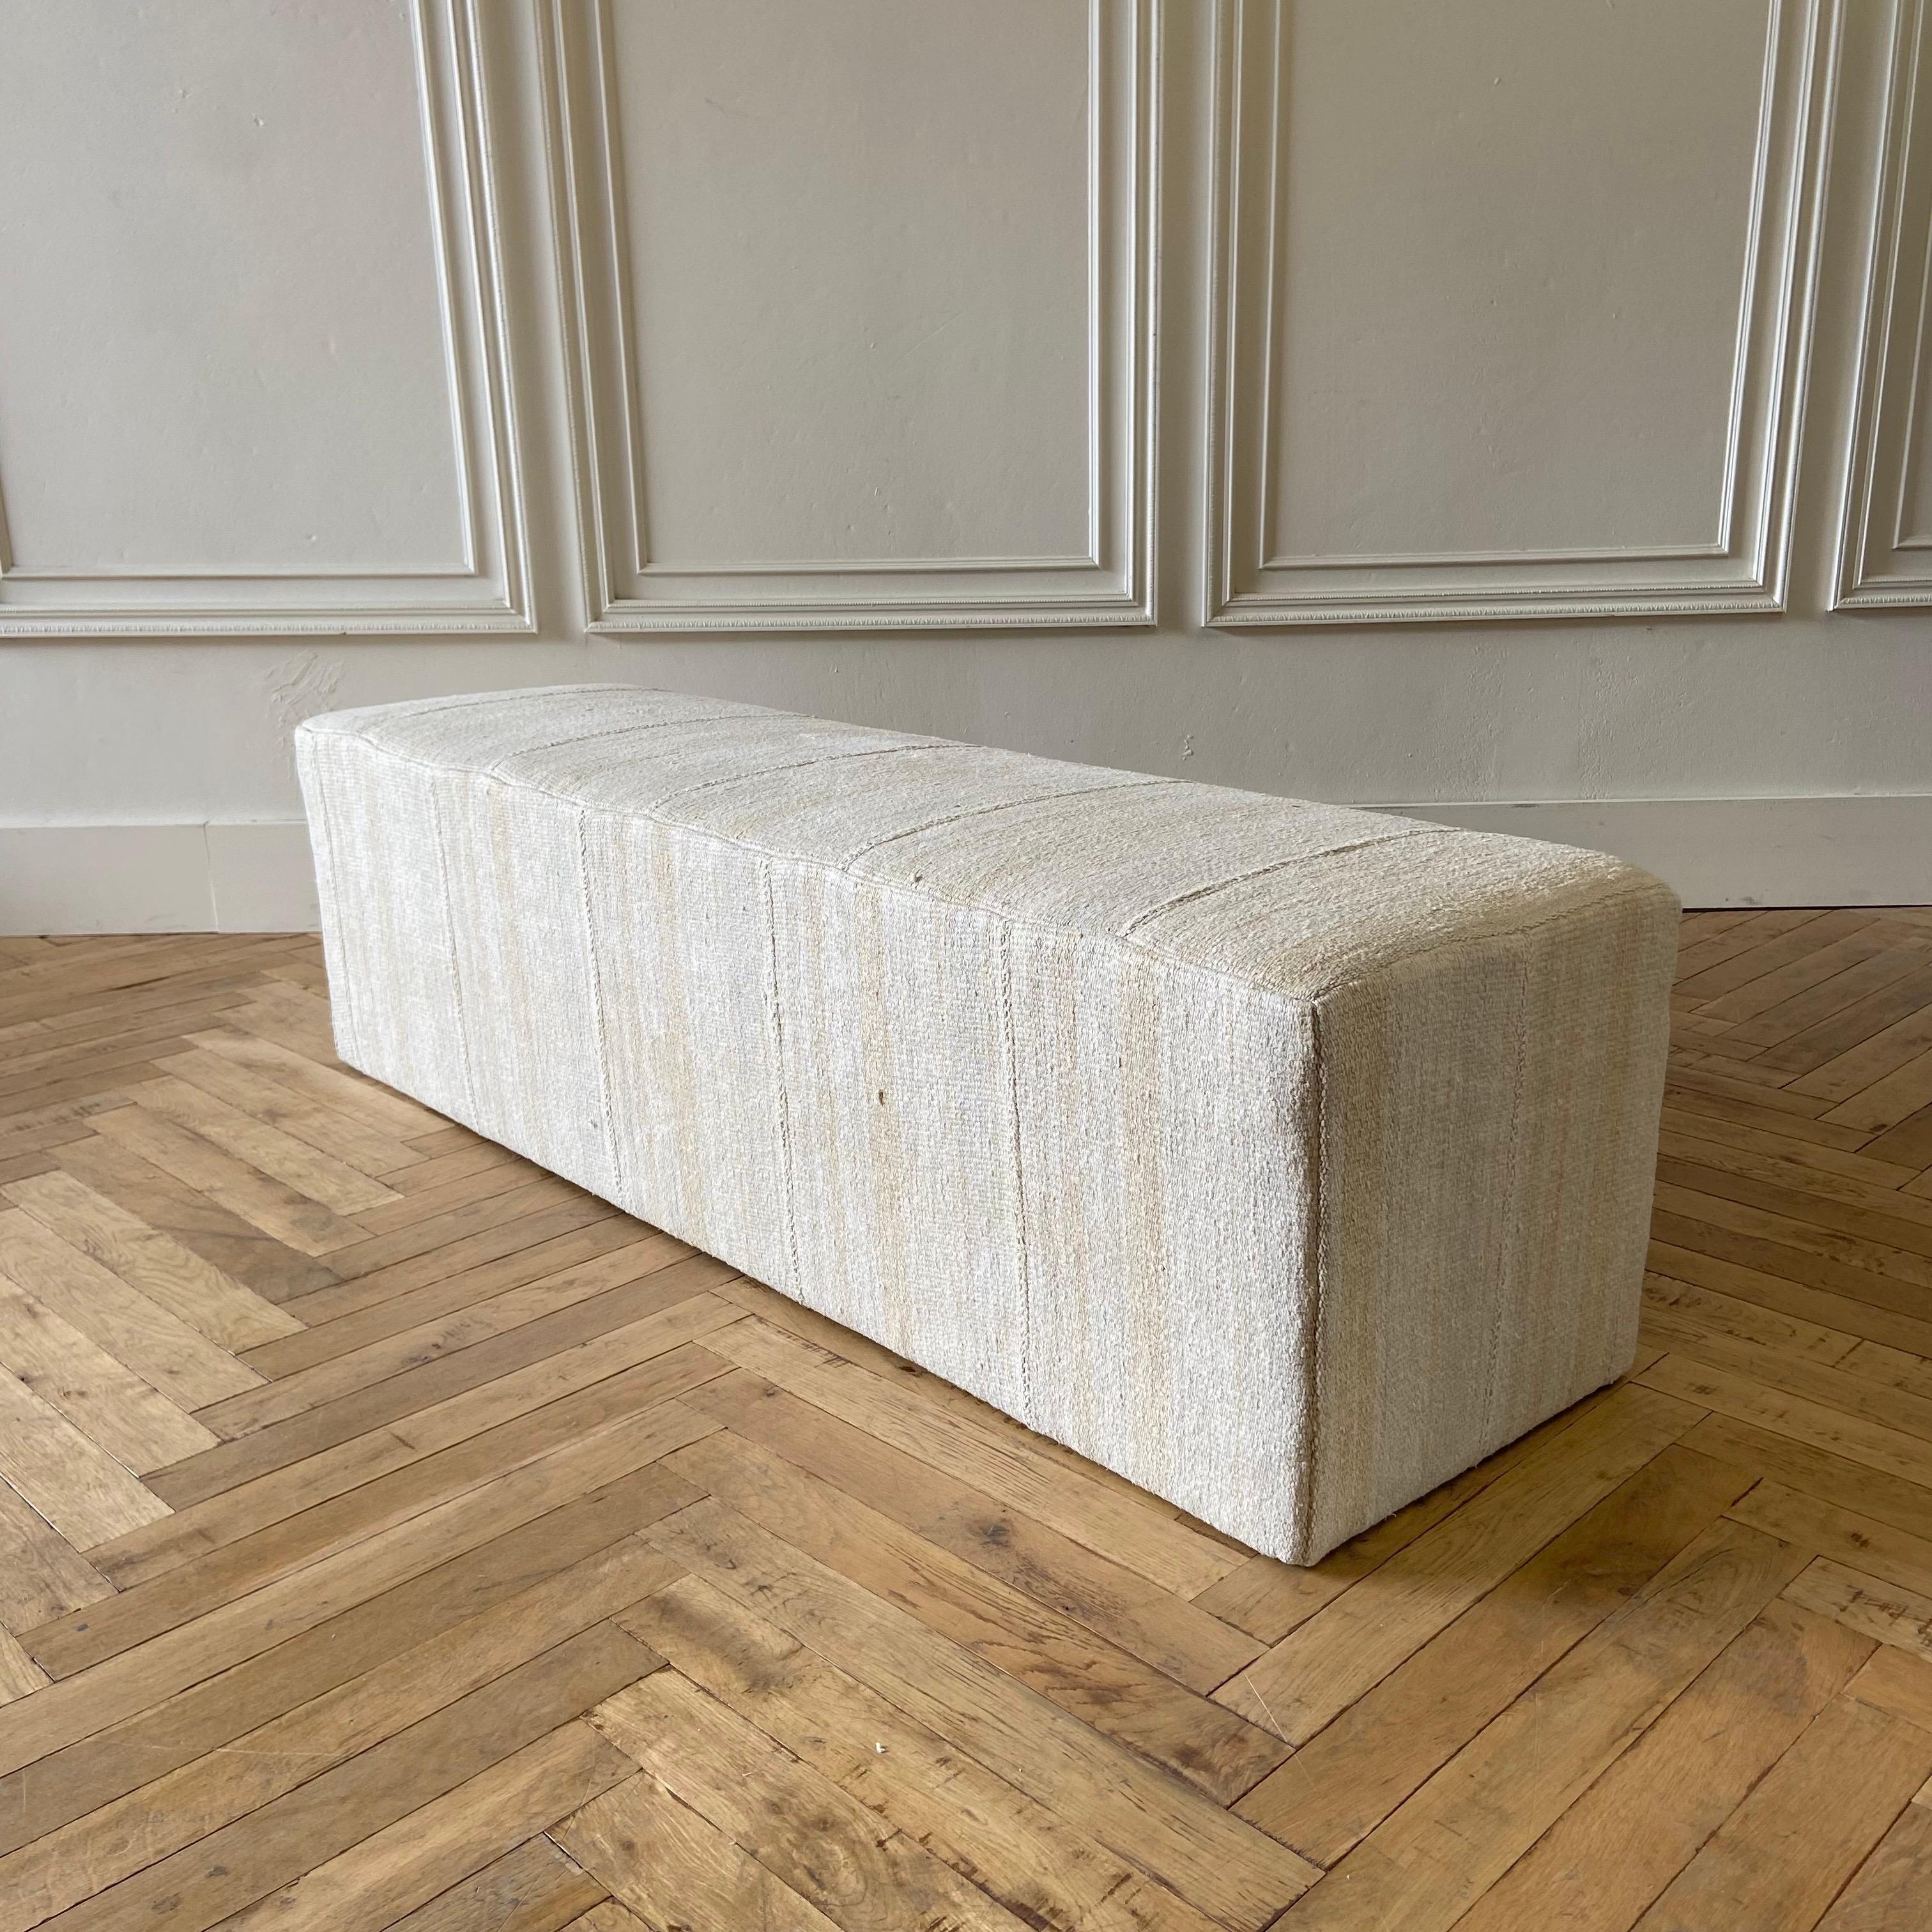 Beautiful Custom made cube ottoman 
Size: 65”W X 19”D X 18”H
Made from a vintage turkish hemp and wool rug, in an off white, with original beautiful hand tied stitched center seam, and faded taupe stripe. Taupe stripe also has a dijon coloring,